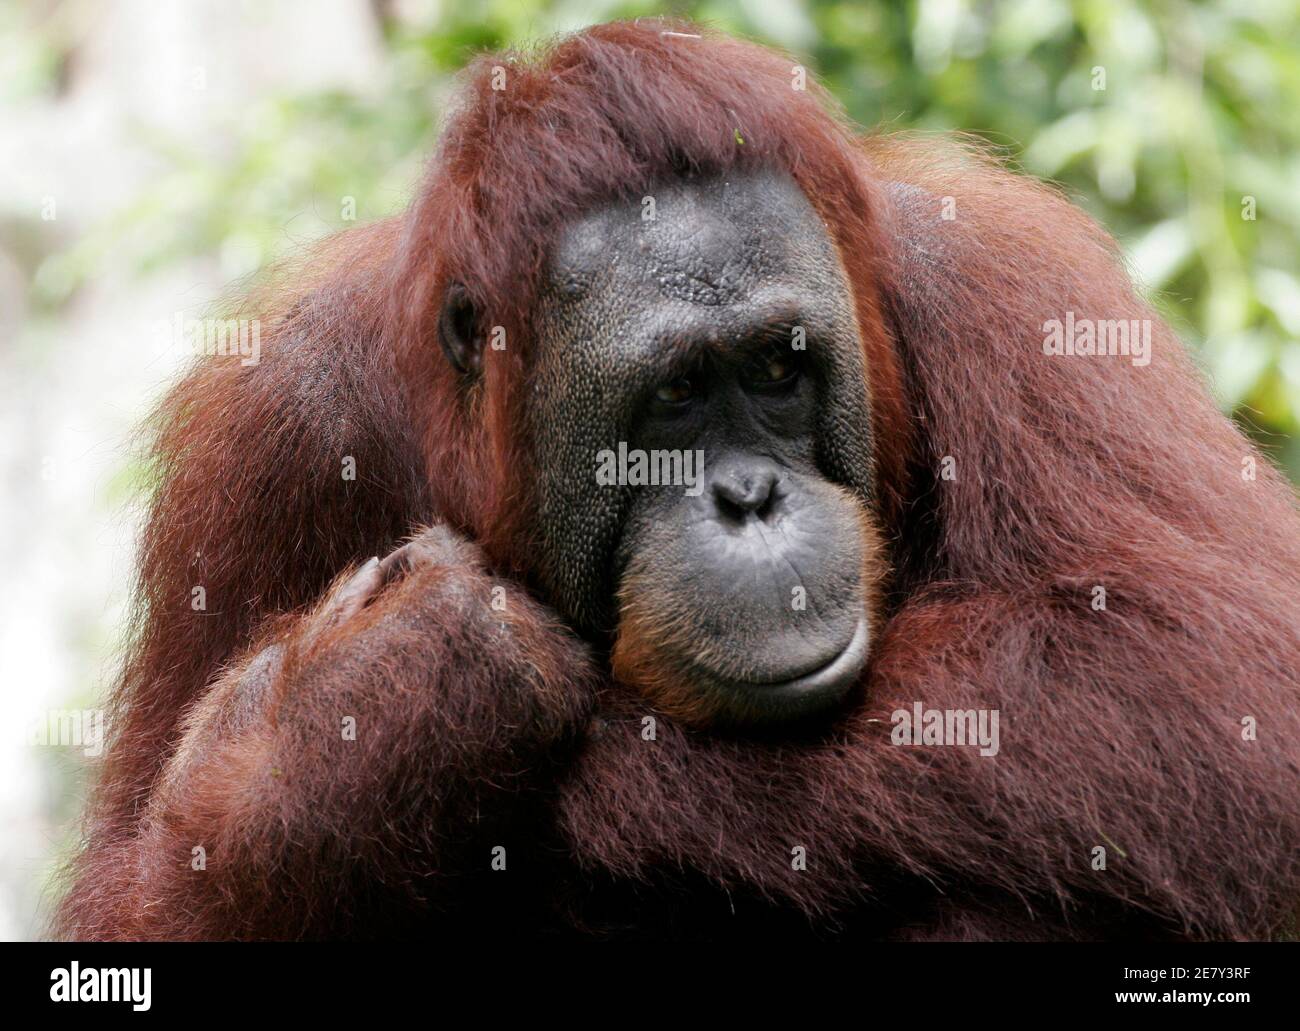 An orangutan looks on at the Singapore Zoo June 4, 2009. The Singapore Zoo has been responsible for the successful births of 33 orangutans, an endangered species, since its opening in 1973. Orangutans, a great ape species native to Malaysia and Indonesia, are highly endangered due to destruction of their rainforest habitats and poaching.   REUTERS/Staff (SINGAPORE ENVIRONMENT ANIMALS) Stock Photo